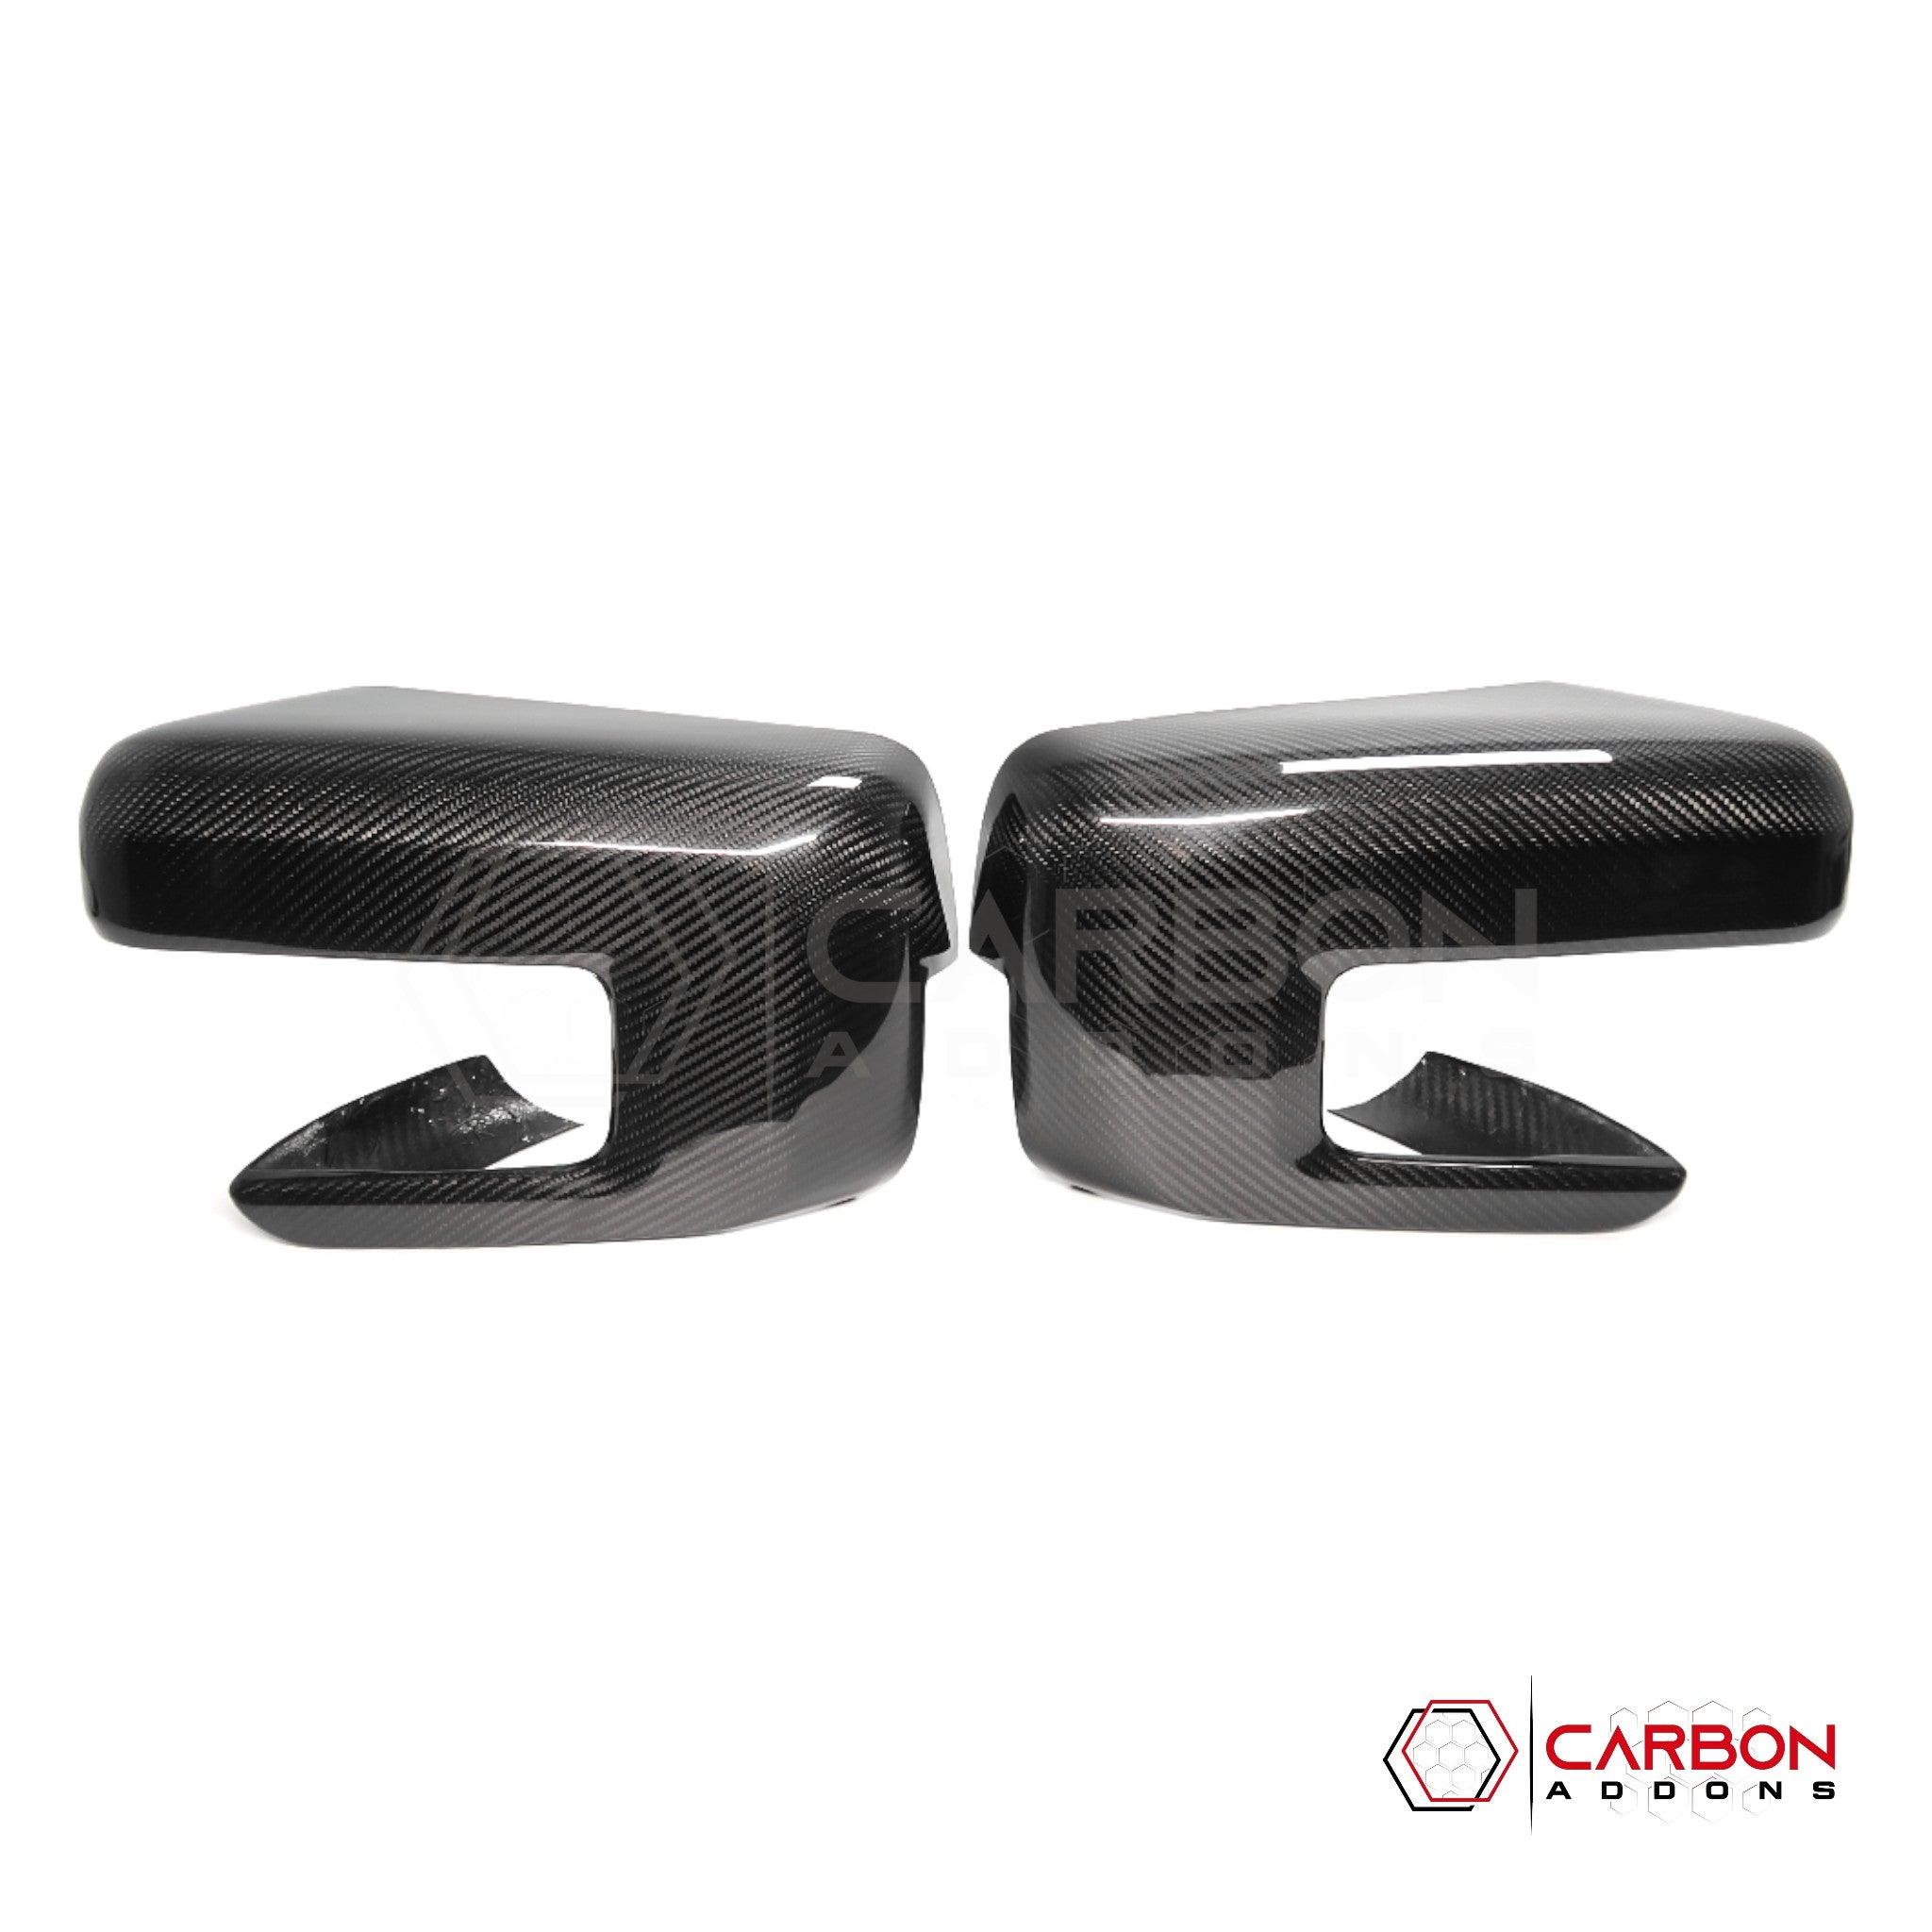 [Coming Soon] Ford F150 2021-Up Side View Mirrors Hard Carbon Fiber Covers - carbonaddons Carbon Fiber Parts, Accessories, Upgrades, Mods